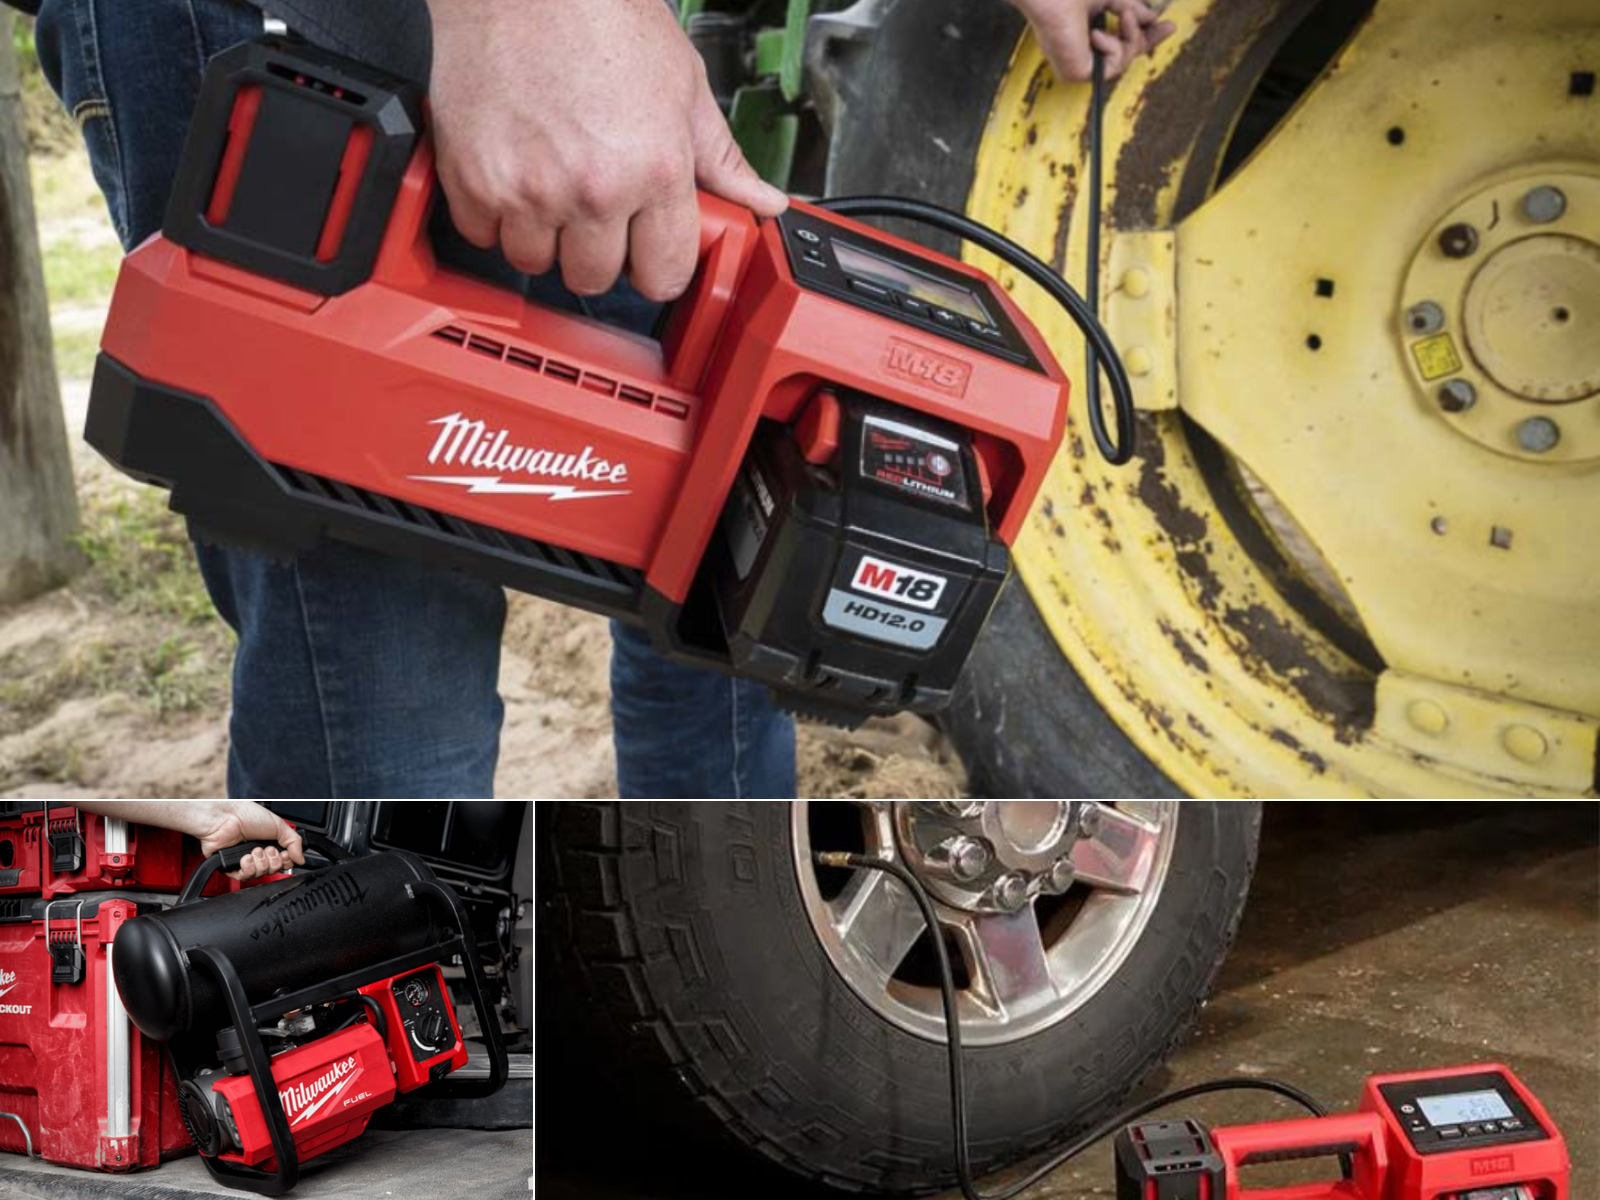 A man airing a tractor tire, another loading a Milwaukee compressor with Milwaukee tool boxes, and another hooked to a tire.